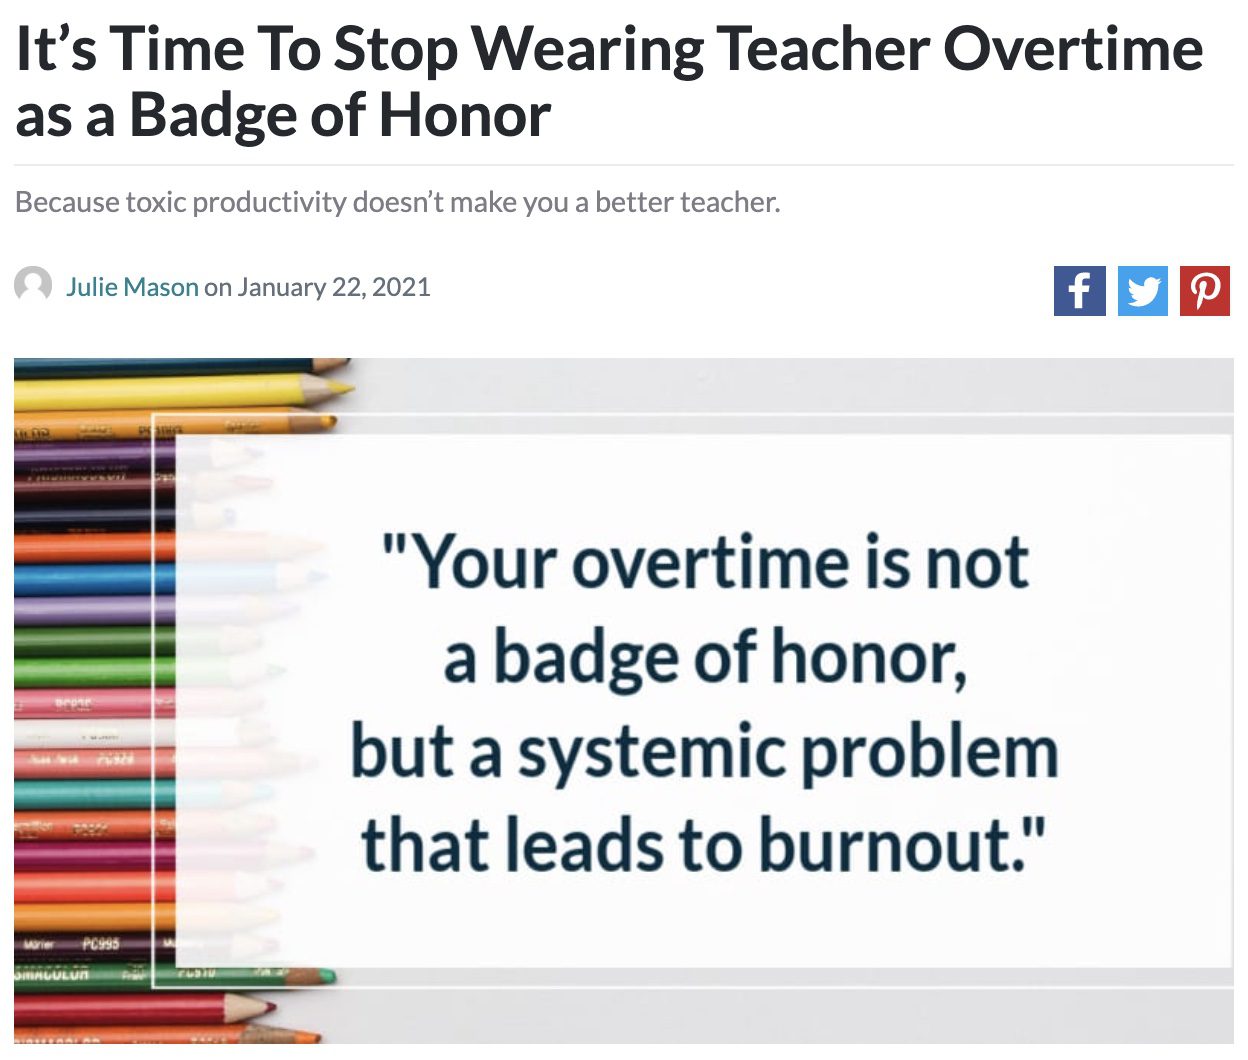 Screencap of an article about wearing overtime as a badge of honor